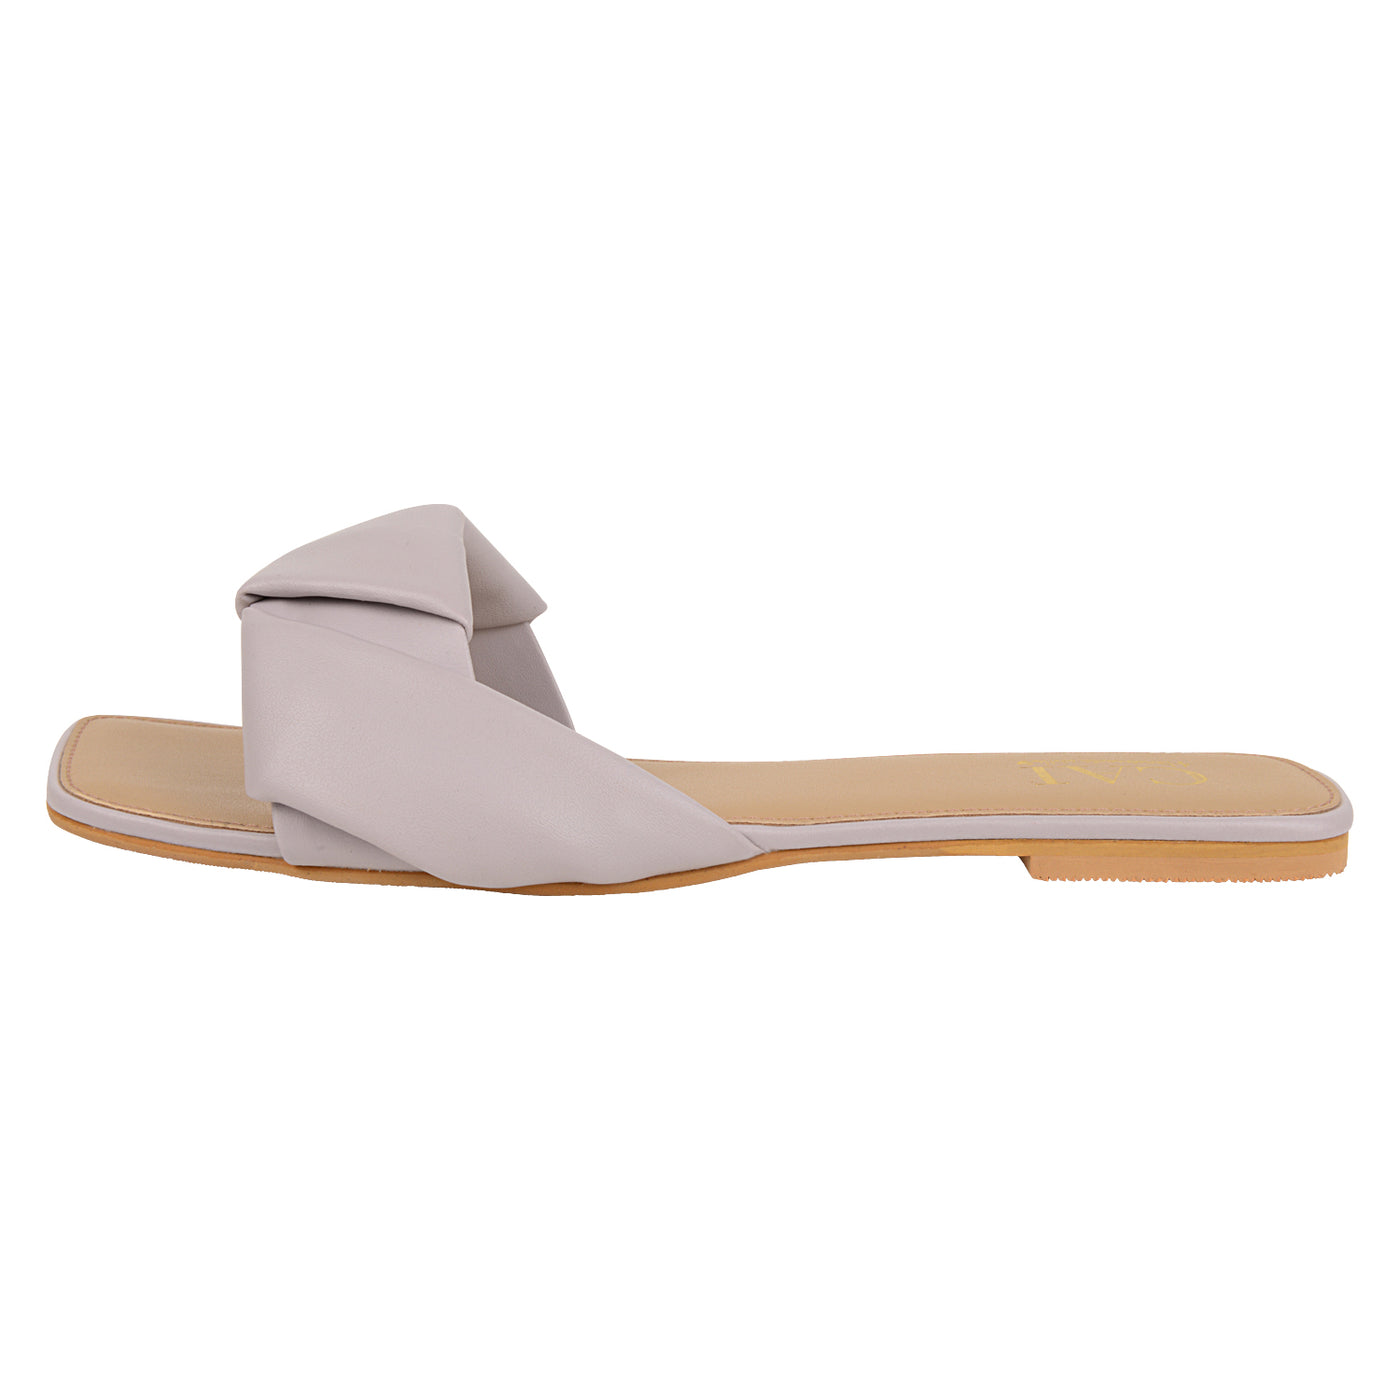 lilac slip on sandals - the cai store